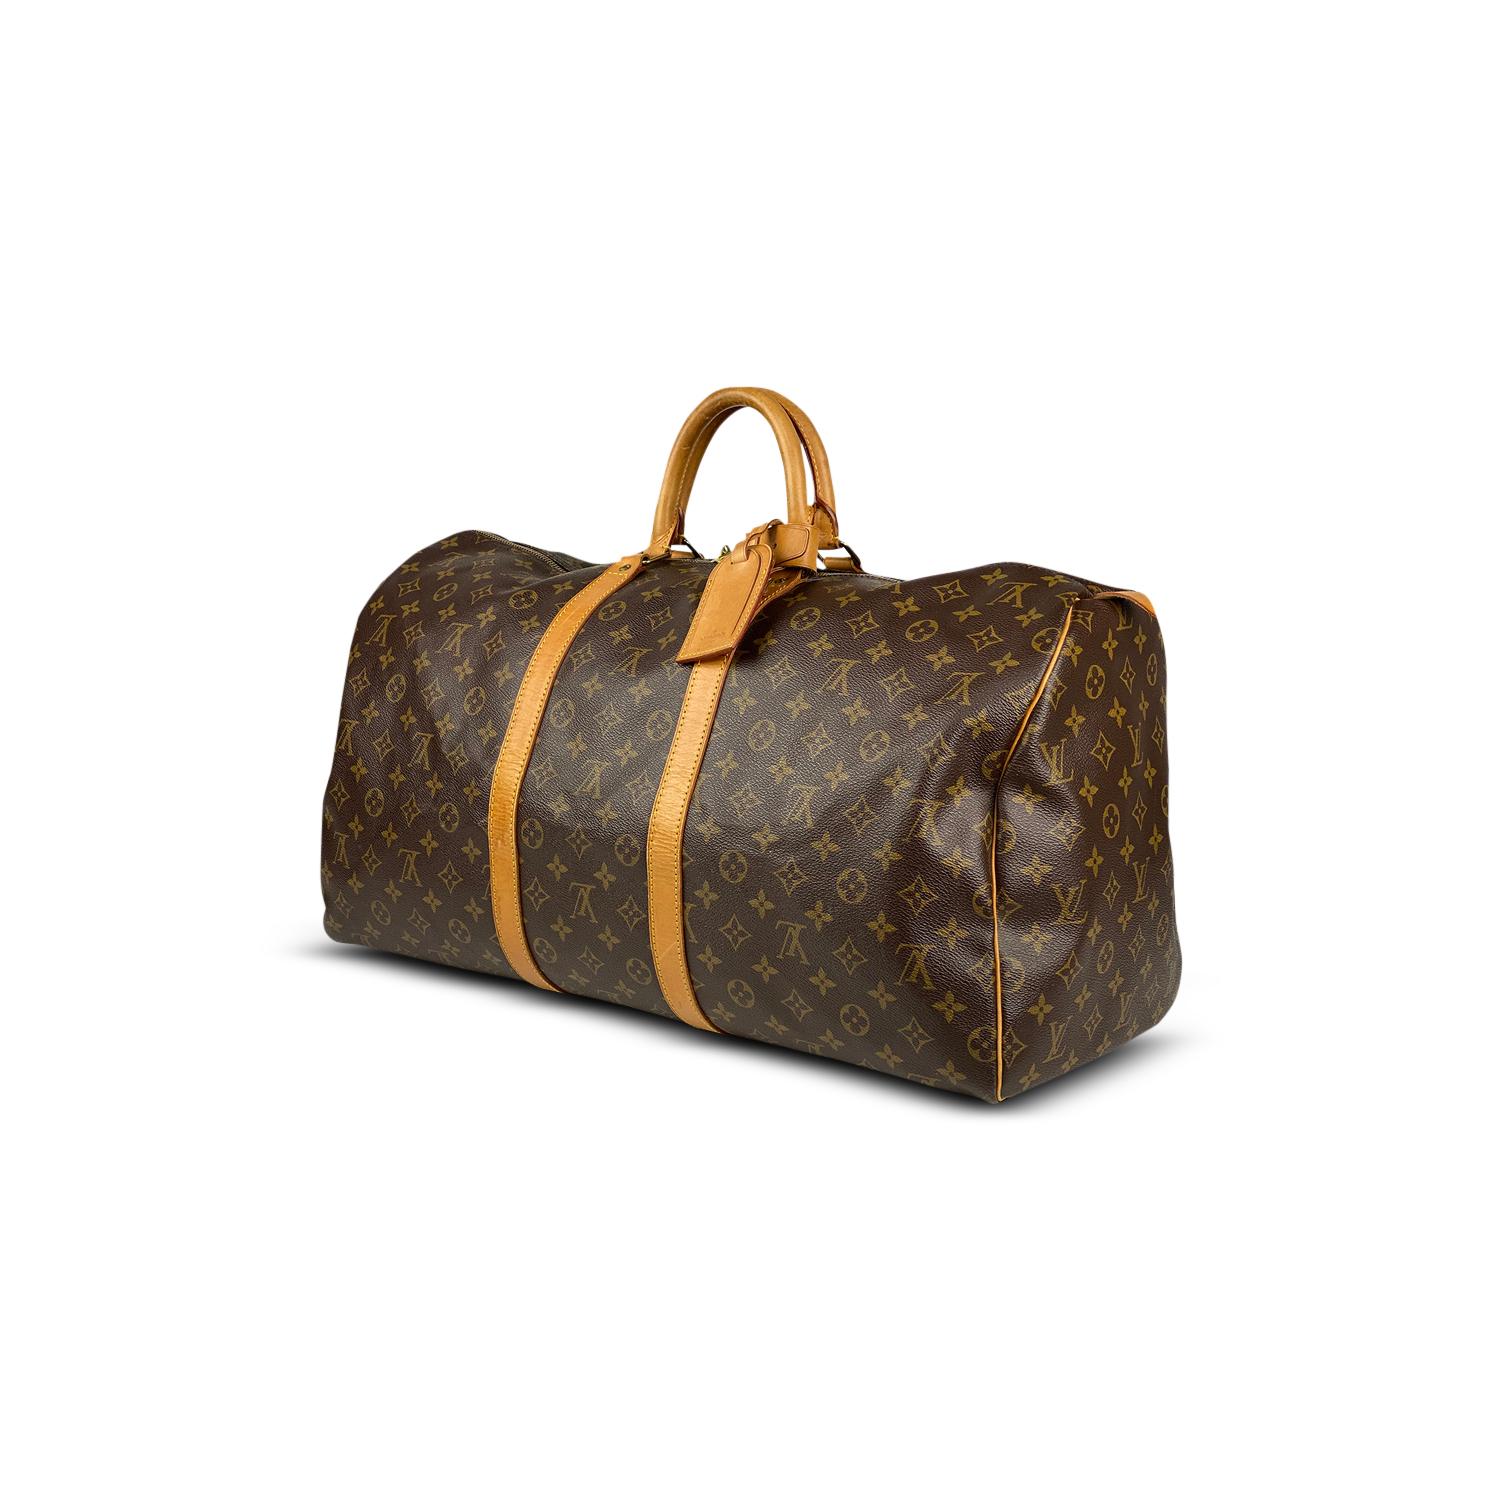 Brown and tan monogram coated canvas Louis Vuitton Keepall 55 with

– Brass hardware
– Tan vachetta leather trim
– Dual rolled top handles
– Tonal canvas lining and two-way zip closure at top

Overall Preloved Condition: Very Good

Exterior